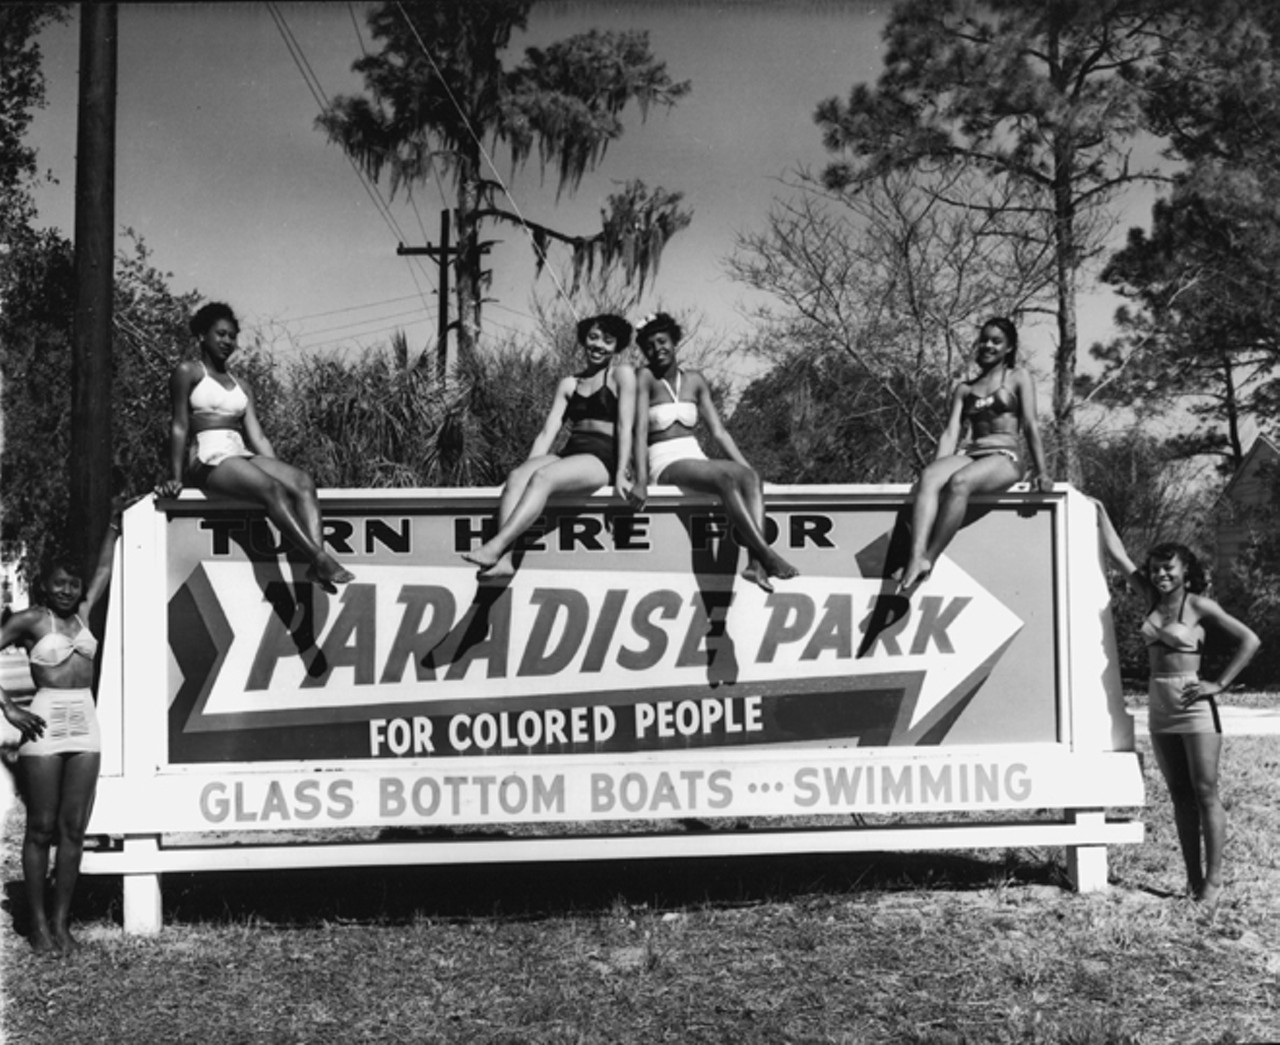 Posing in their swimsuits in an advertisement for Paradise Park are (left to right) Ida Lee Donaldson, unknown, Susie Long, Alma Jacobs, Patricia Bright, and Ernestine Stevenson, 1950. Photo by Bruce Mozert. By permission of Bruce Mozert. Courtesy of Cynthia Wilson-Graham. Reprinted with permission of the University Press of Florida.